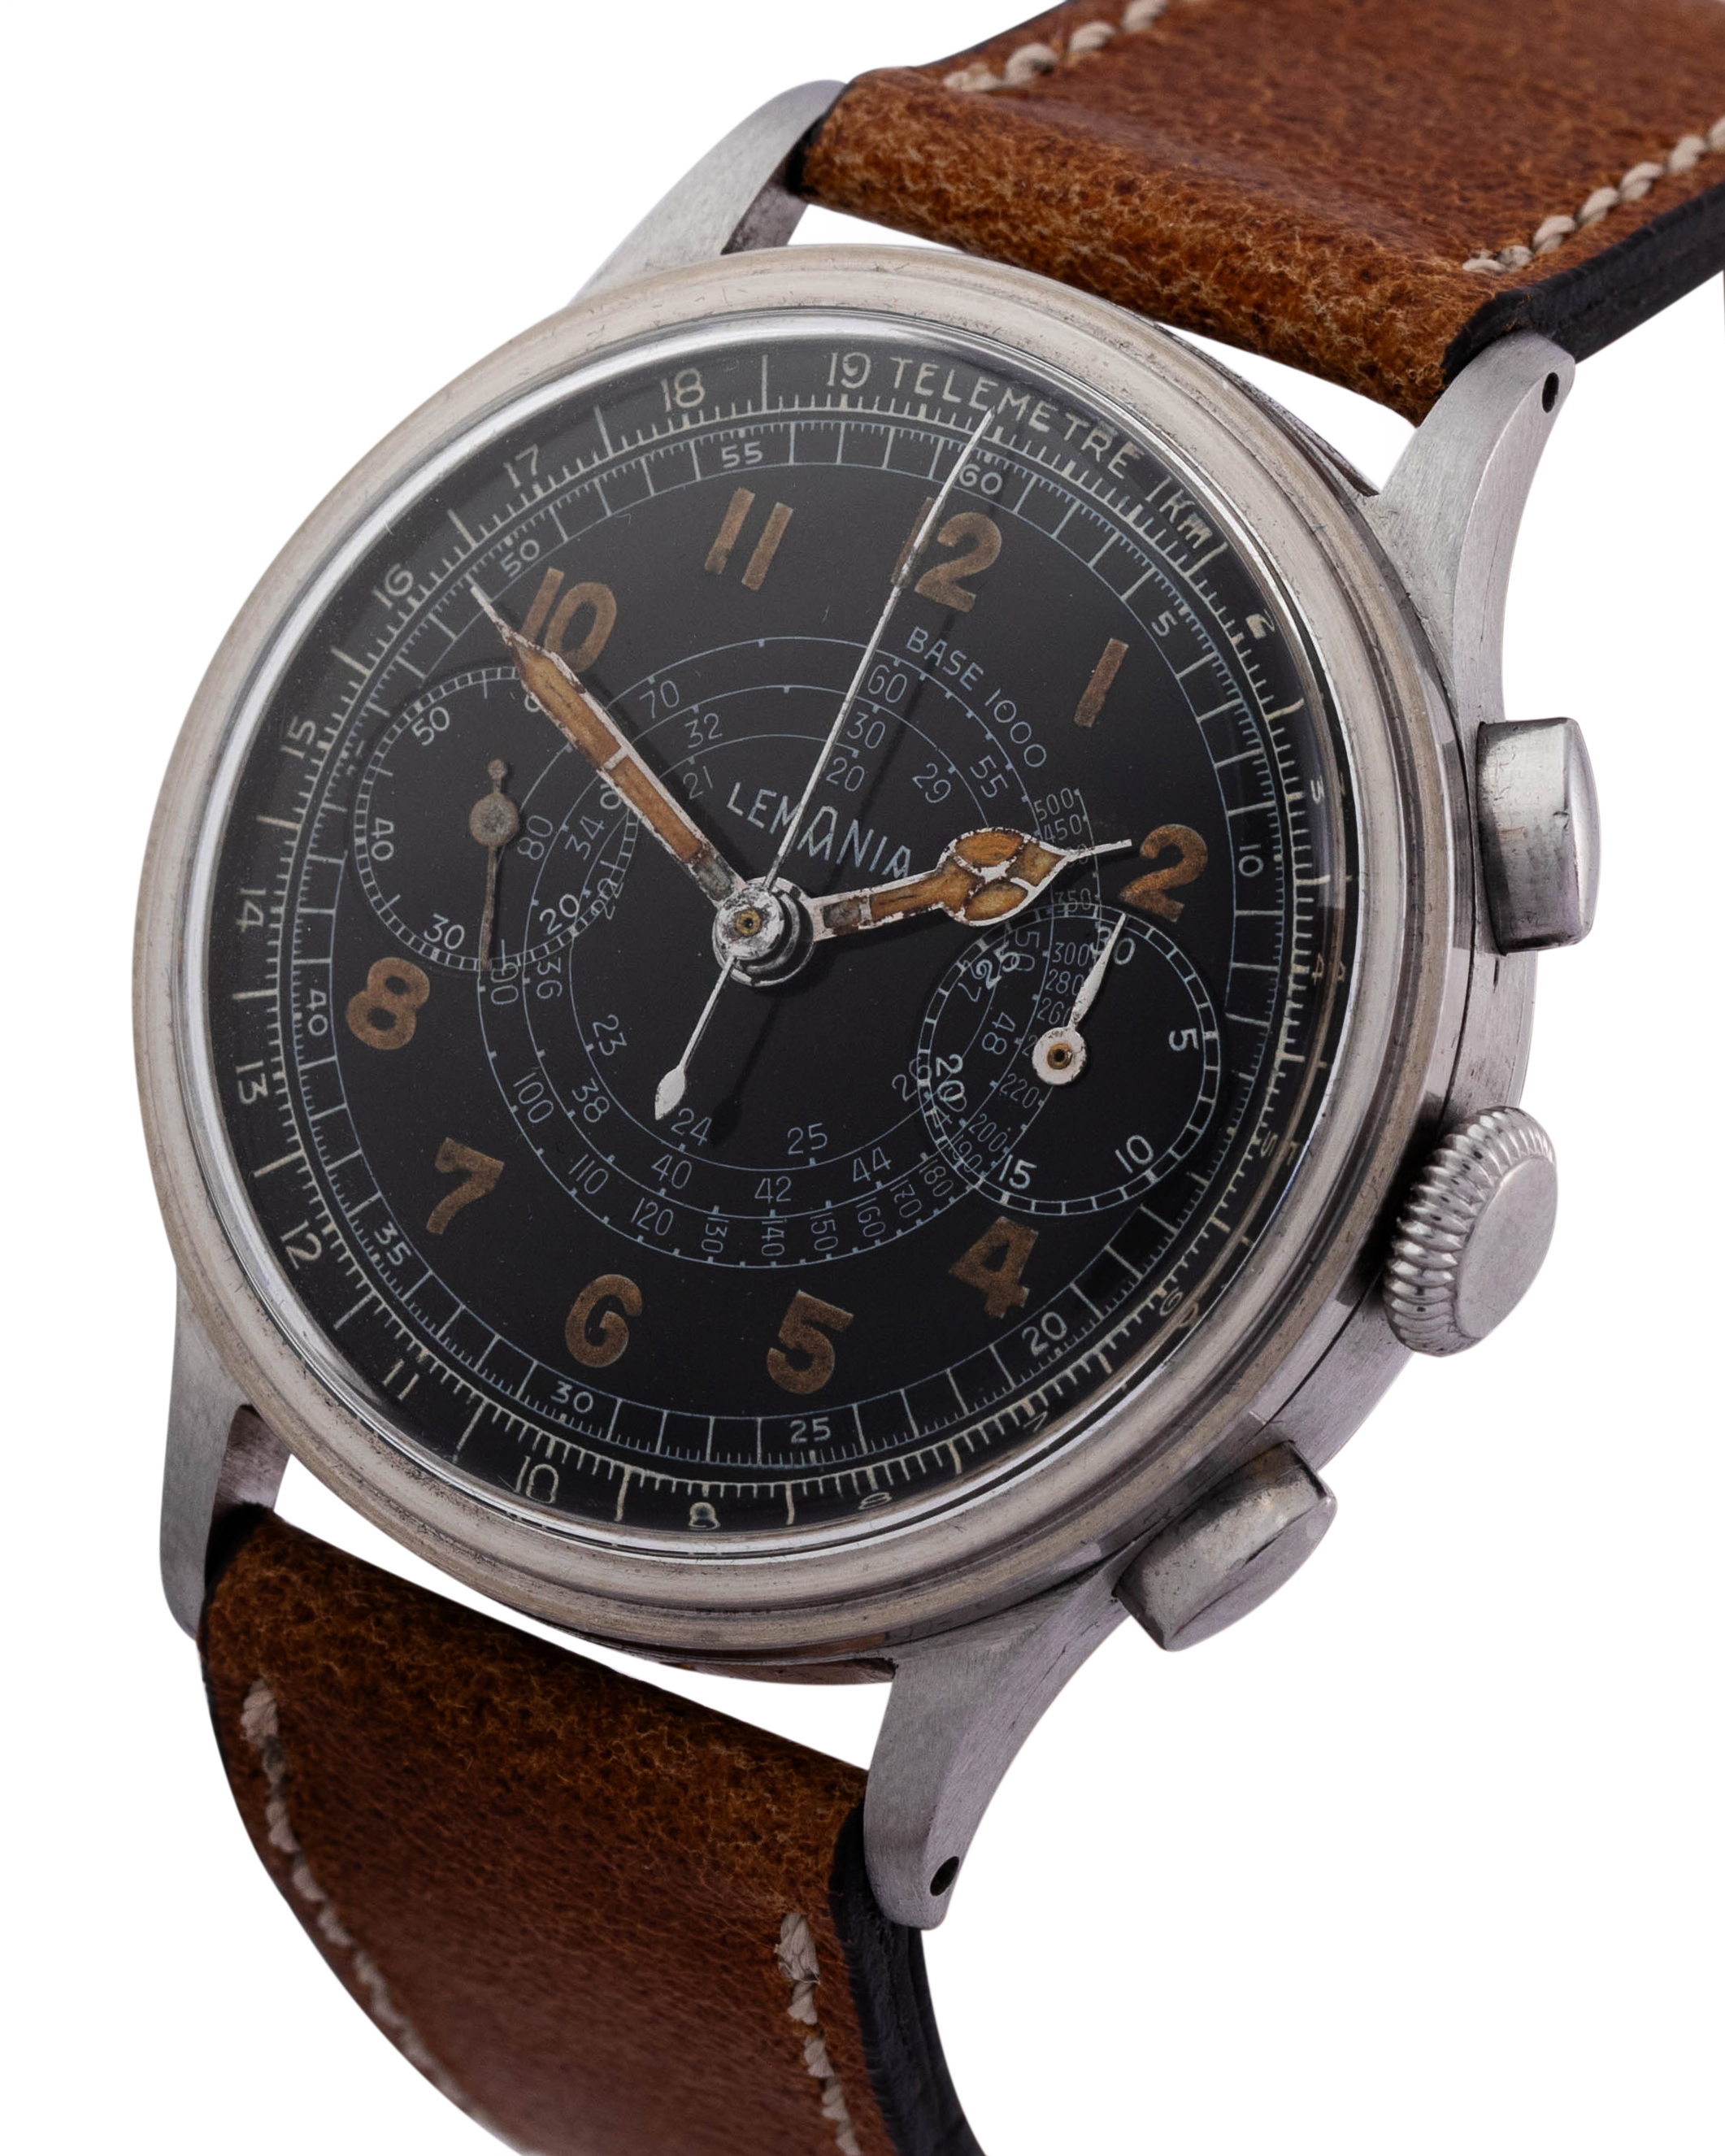 Lemania Oversize Chronograph "Big Arabic Numerals" stainless steel and black dial